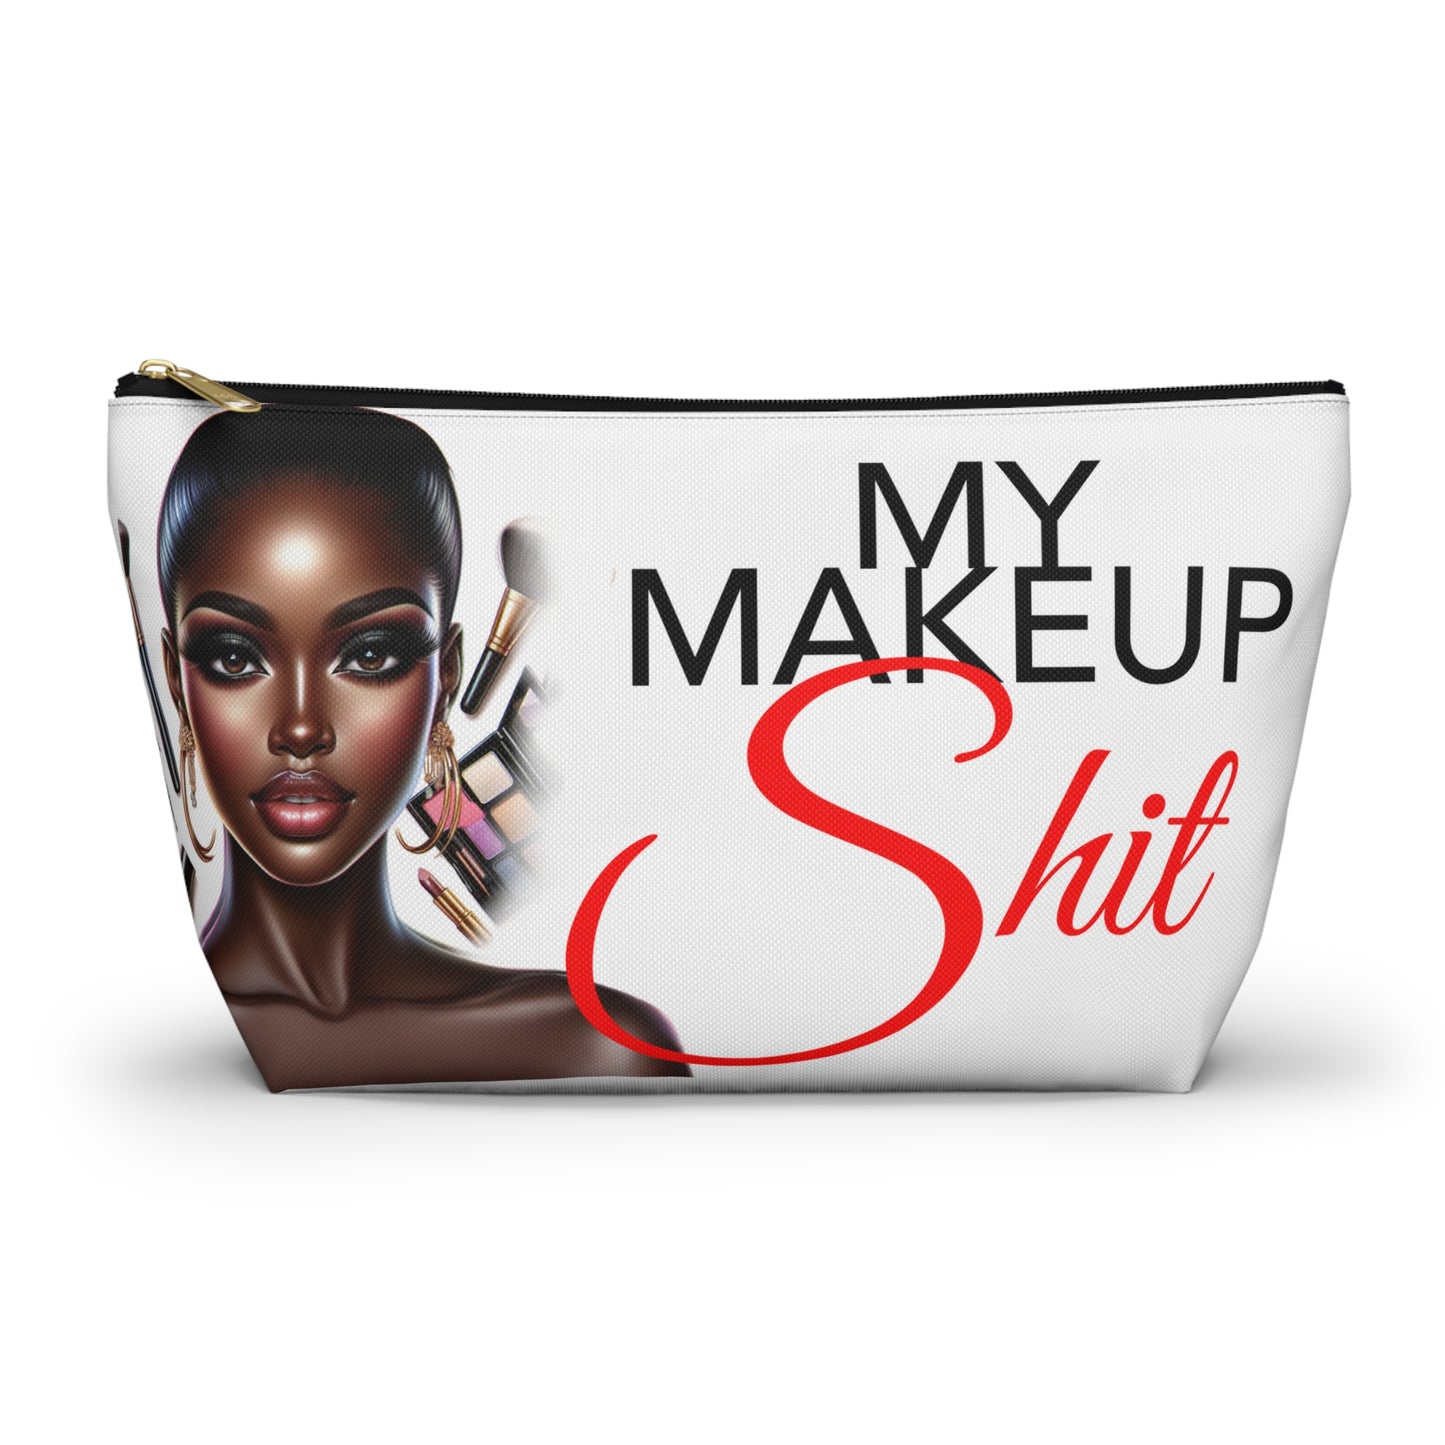 Copy of My Makeup Pouch - Compact Cosmetic Bag  Portable Beauty Organizer, Small Makeup Case, Trendy Makeup Bag, Makeup Storage, Accessory Pouch